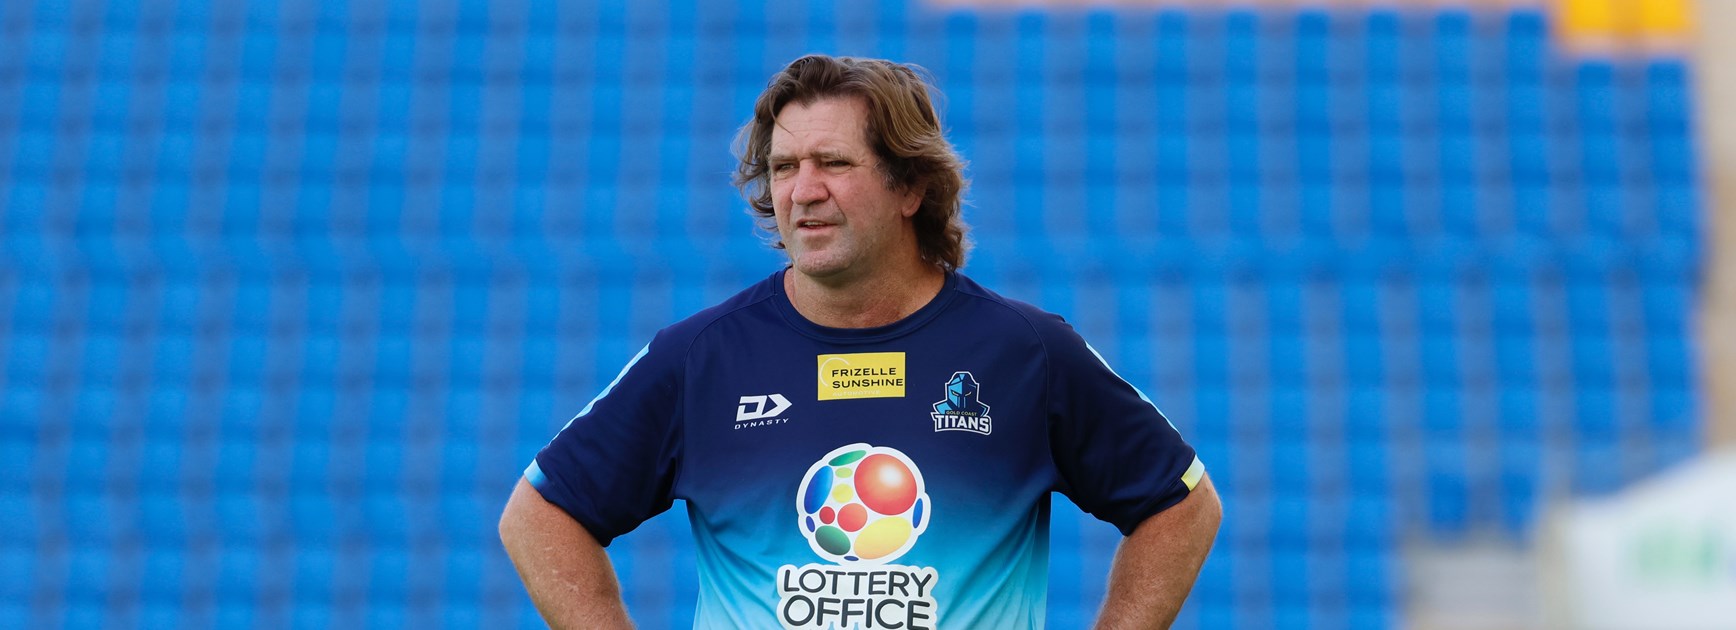 Maintaining optimism: Hasler confident 'good signs' will lead to results